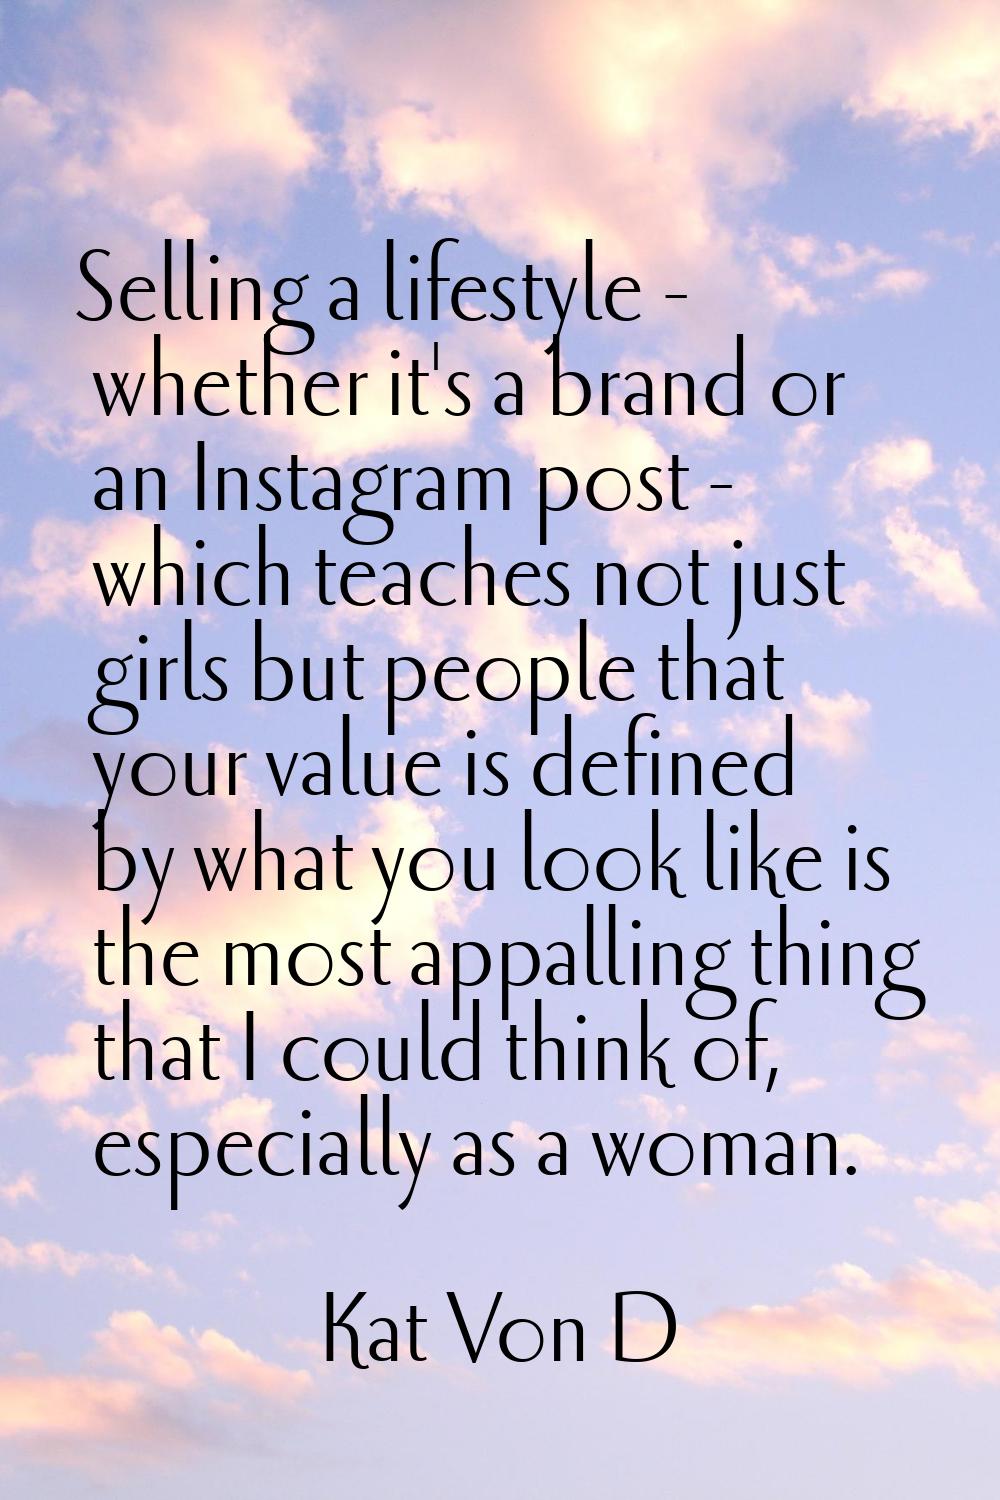 Selling a lifestyle - whether it's a brand or an Instagram post - which teaches not just girls but 